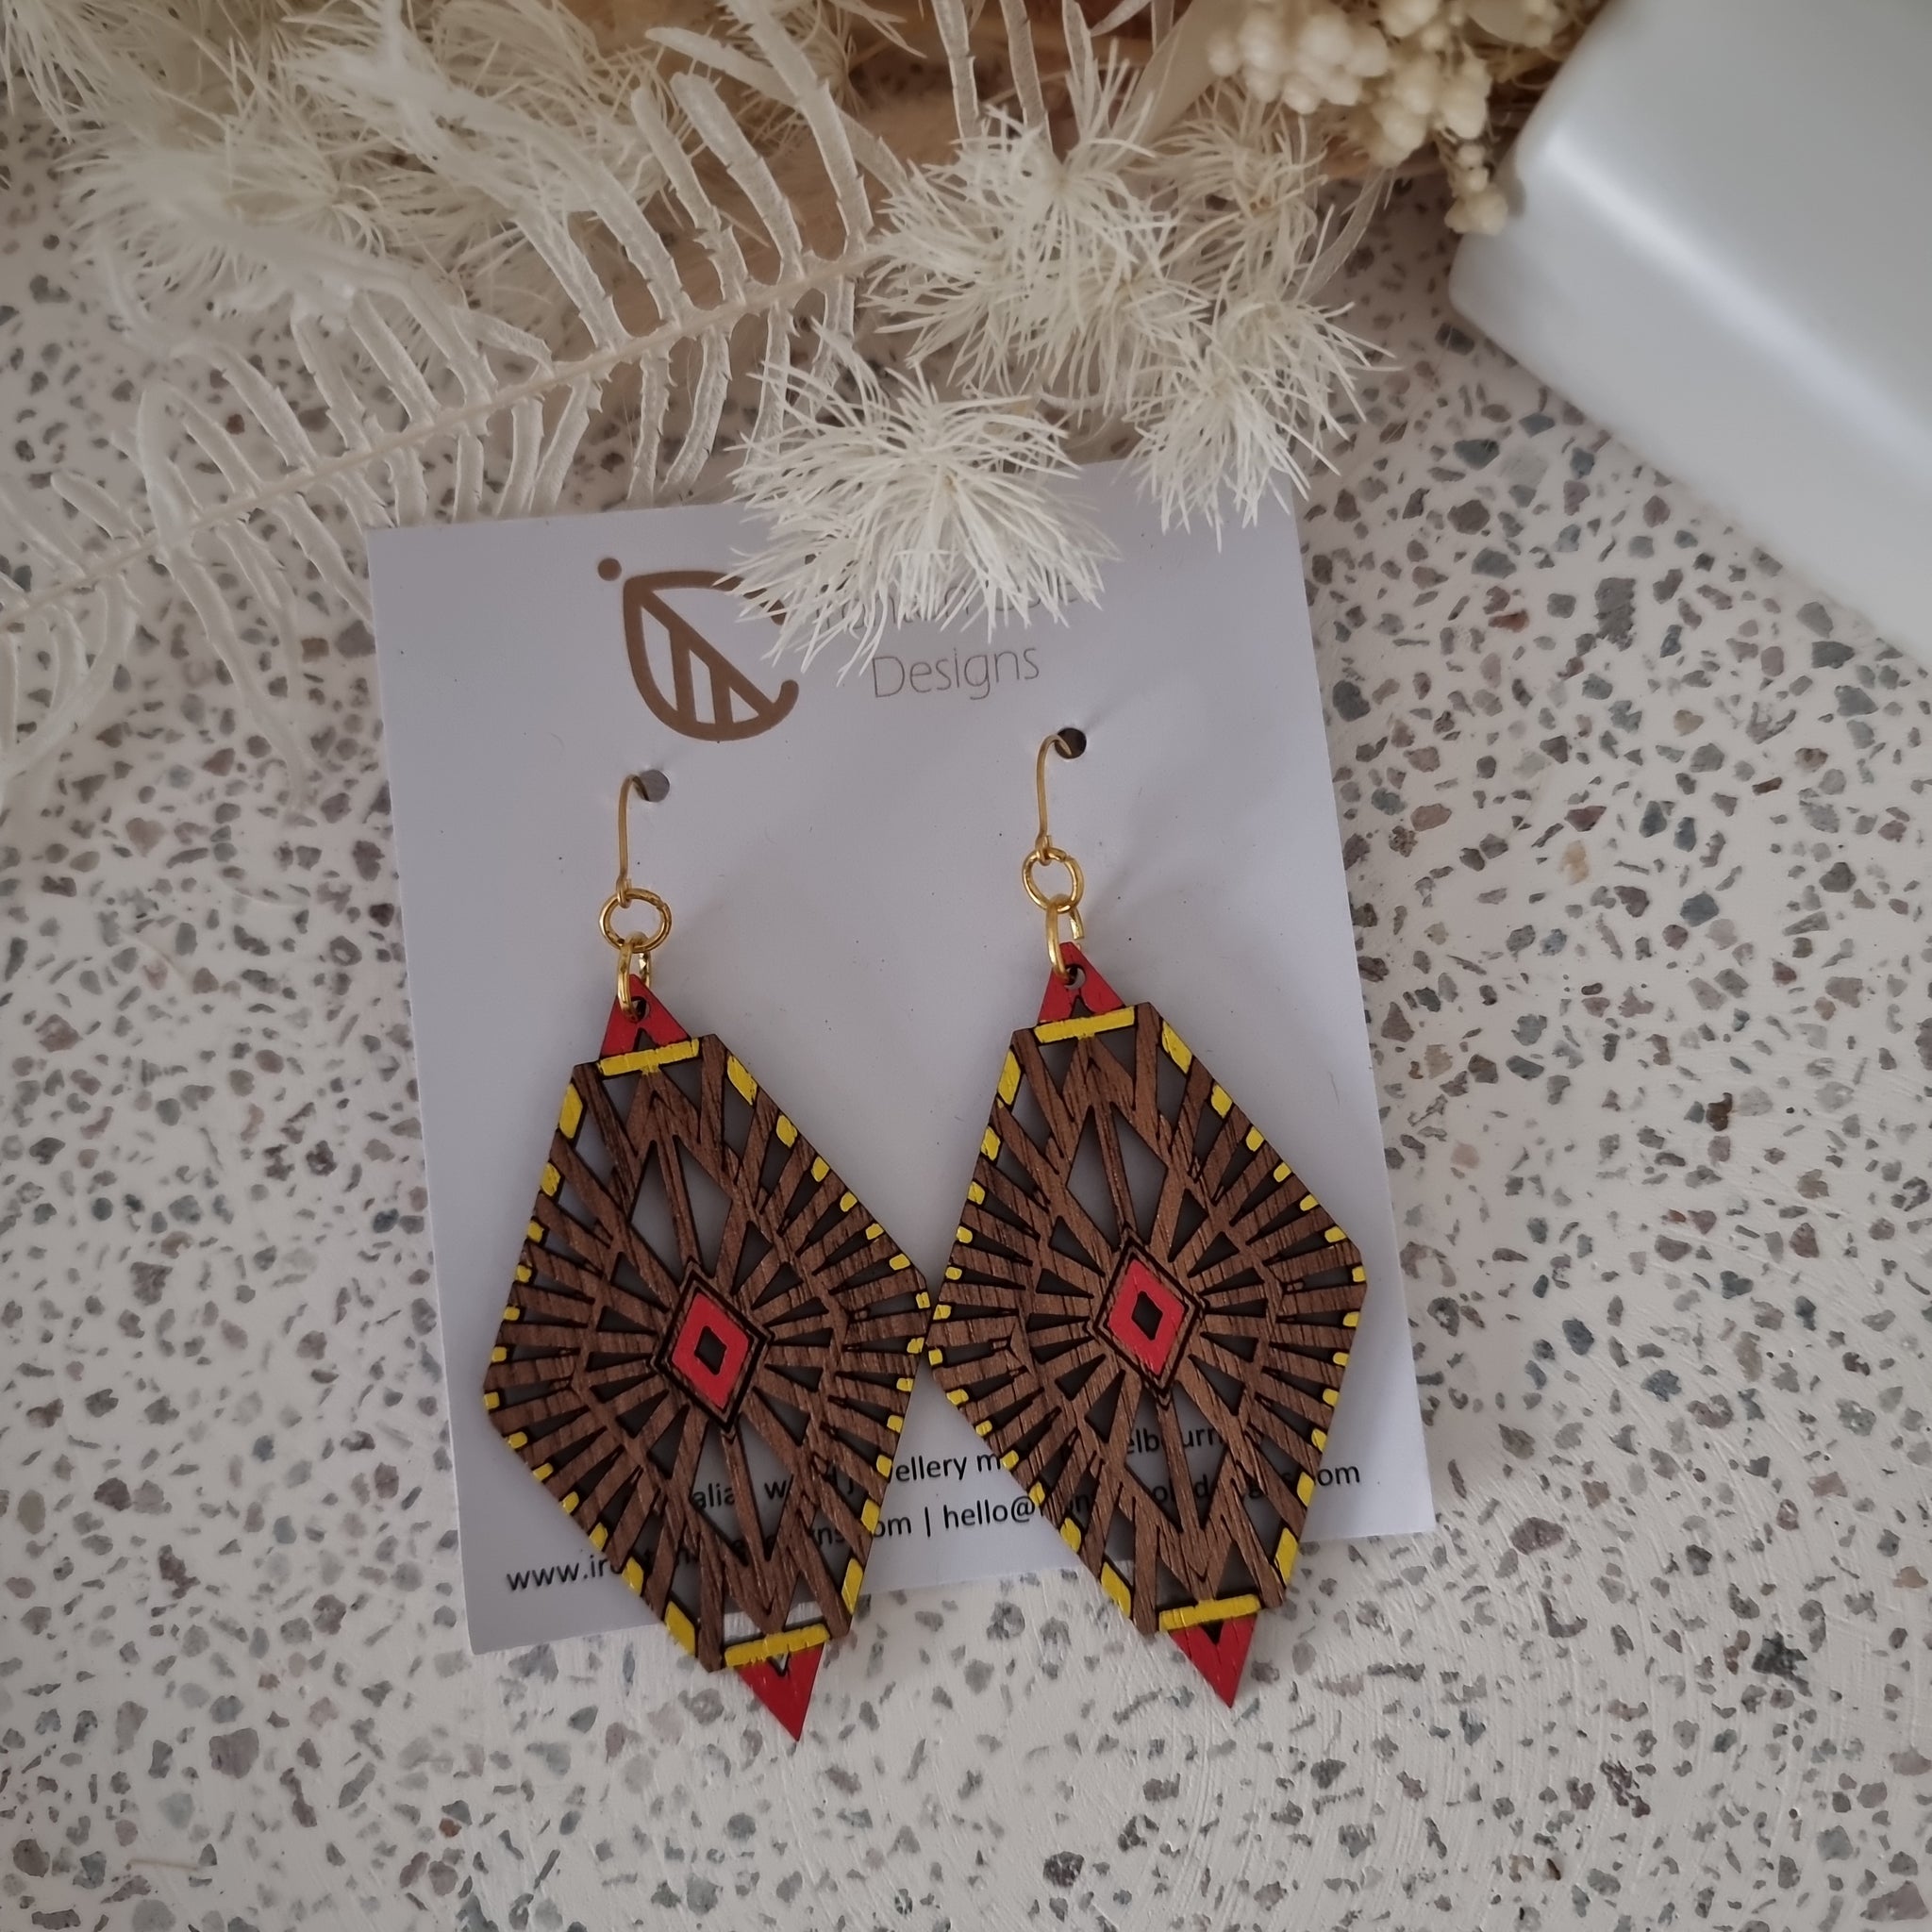 Wooden diamond shaped earrings with an art deco twist. Painted red and yellow with gold hooks.